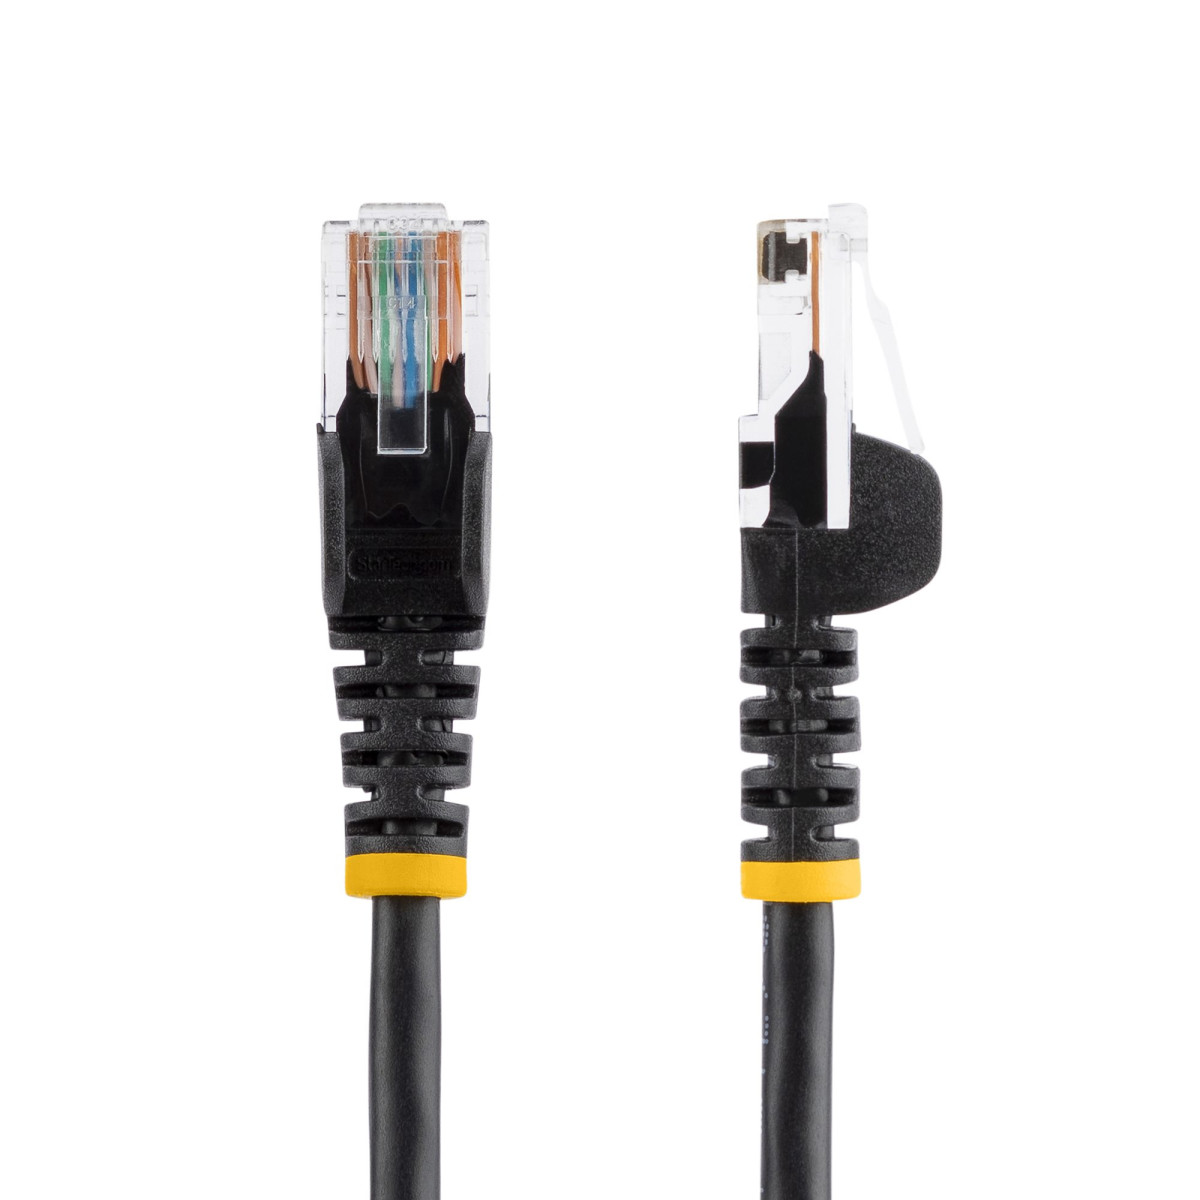 7m Black Snagless Cat5e Patch Cable